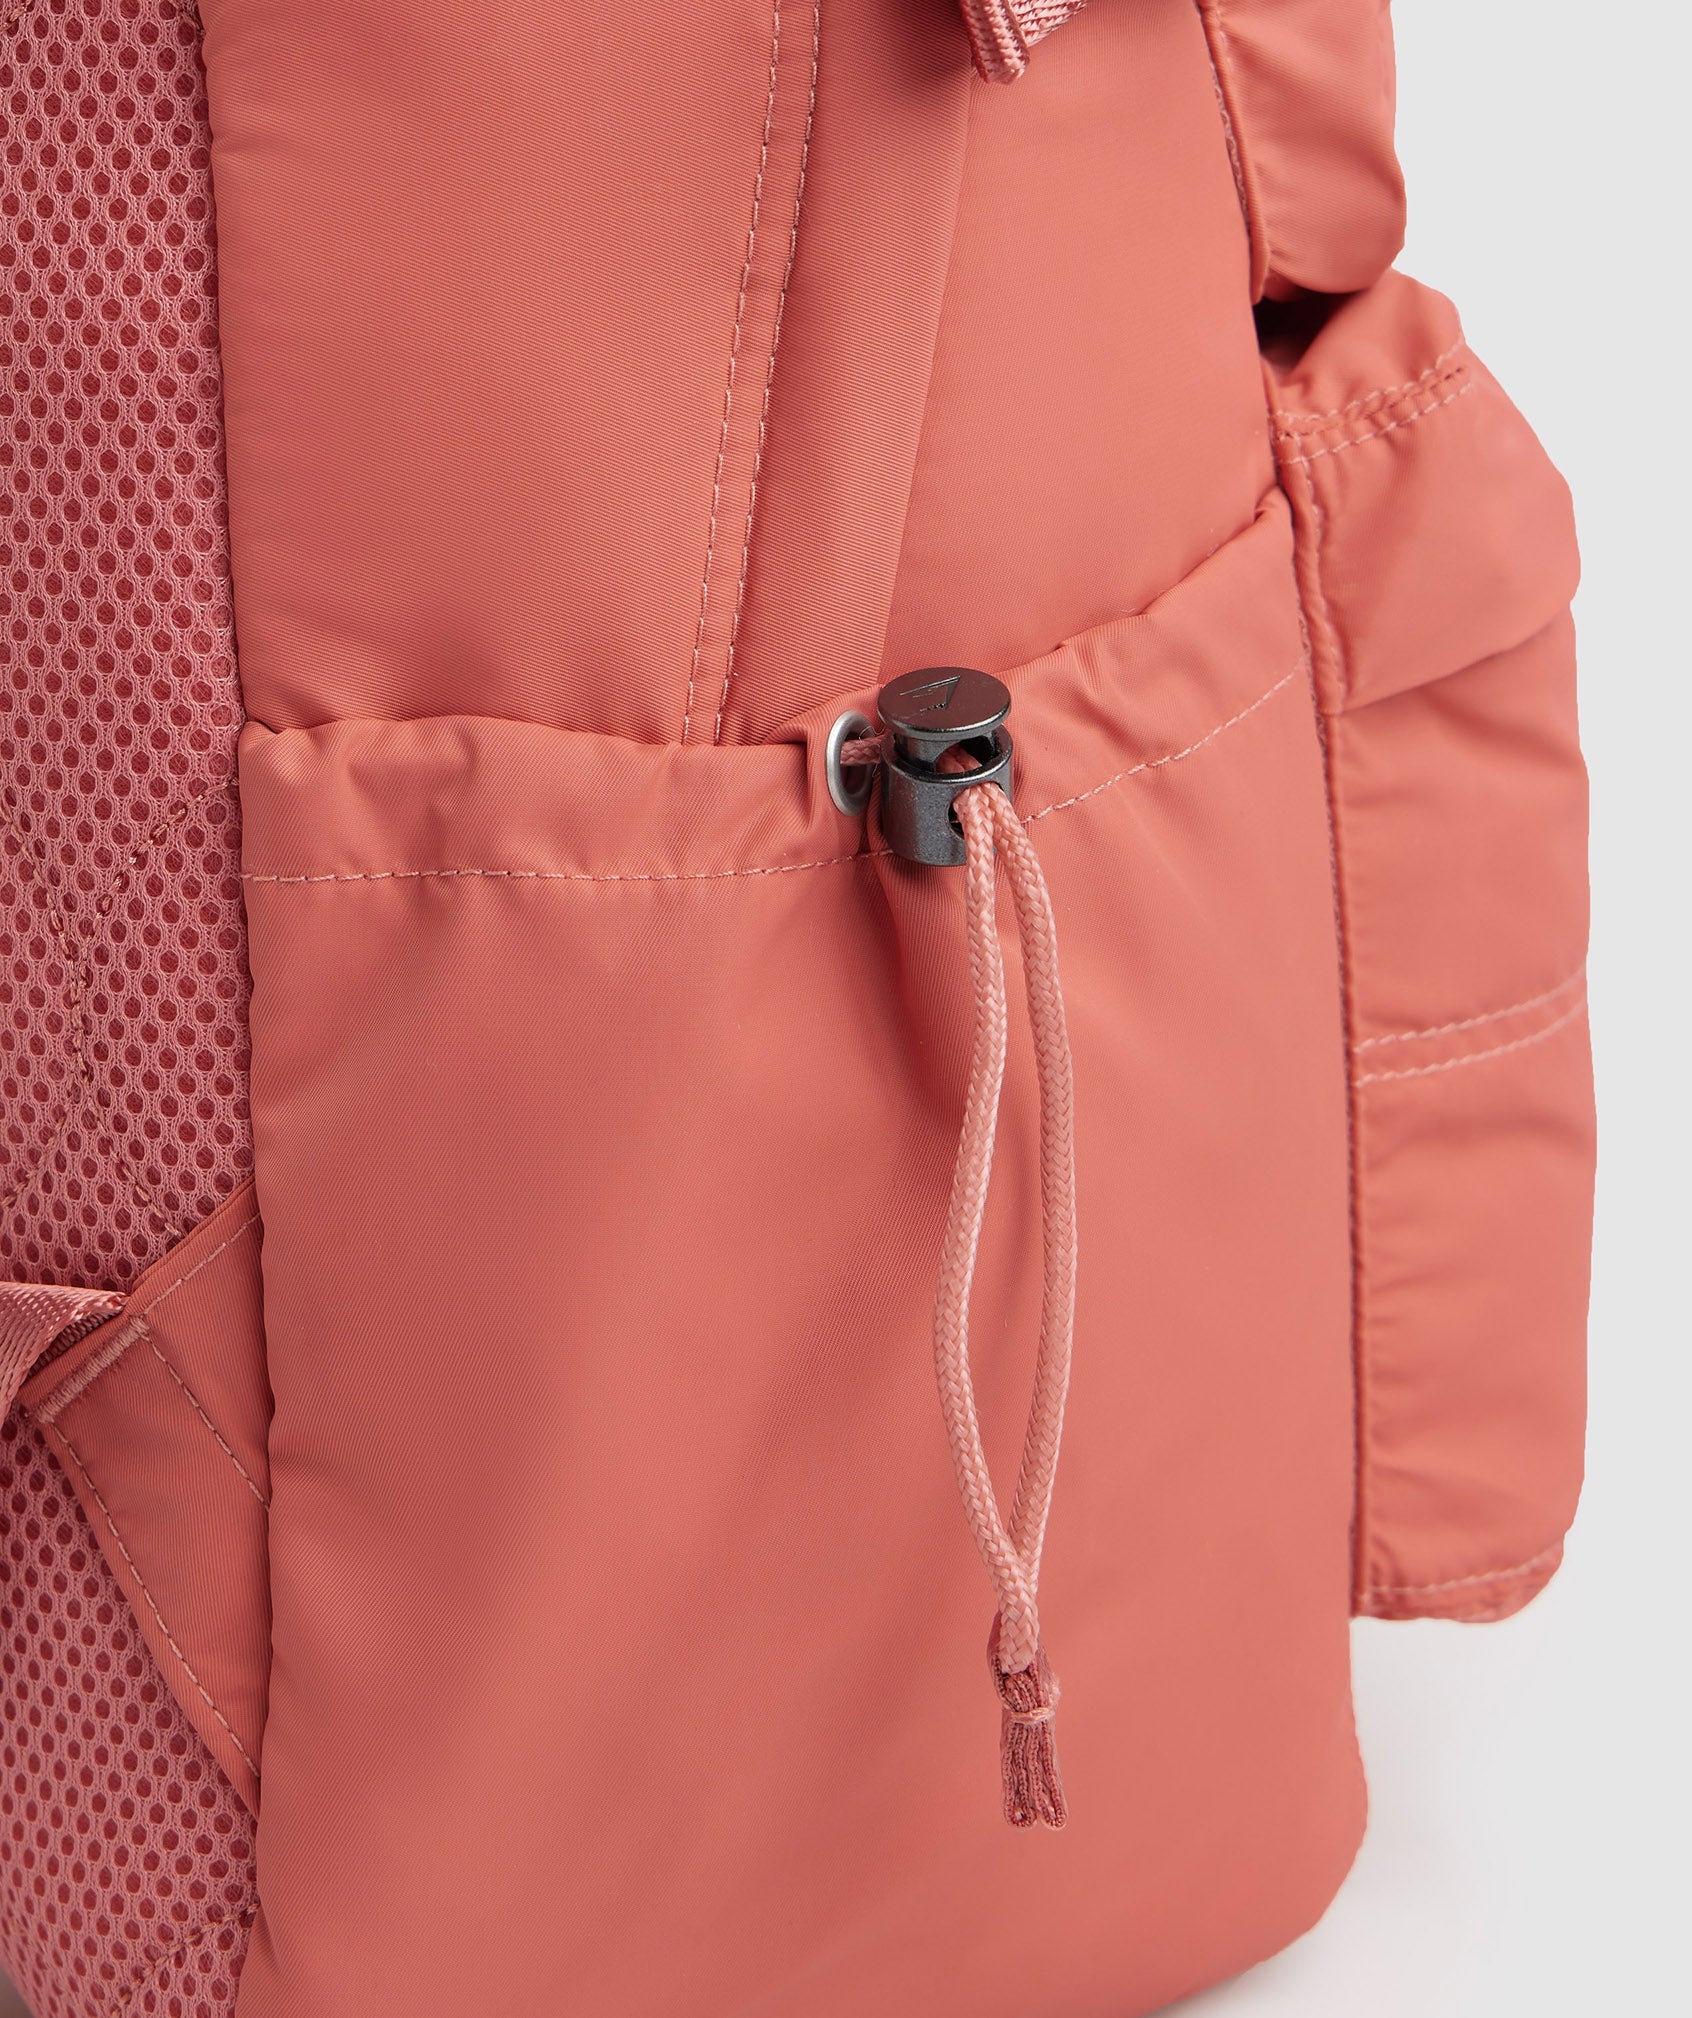 Premium Lifestyle Backpack in Terracotta Pink - view 6